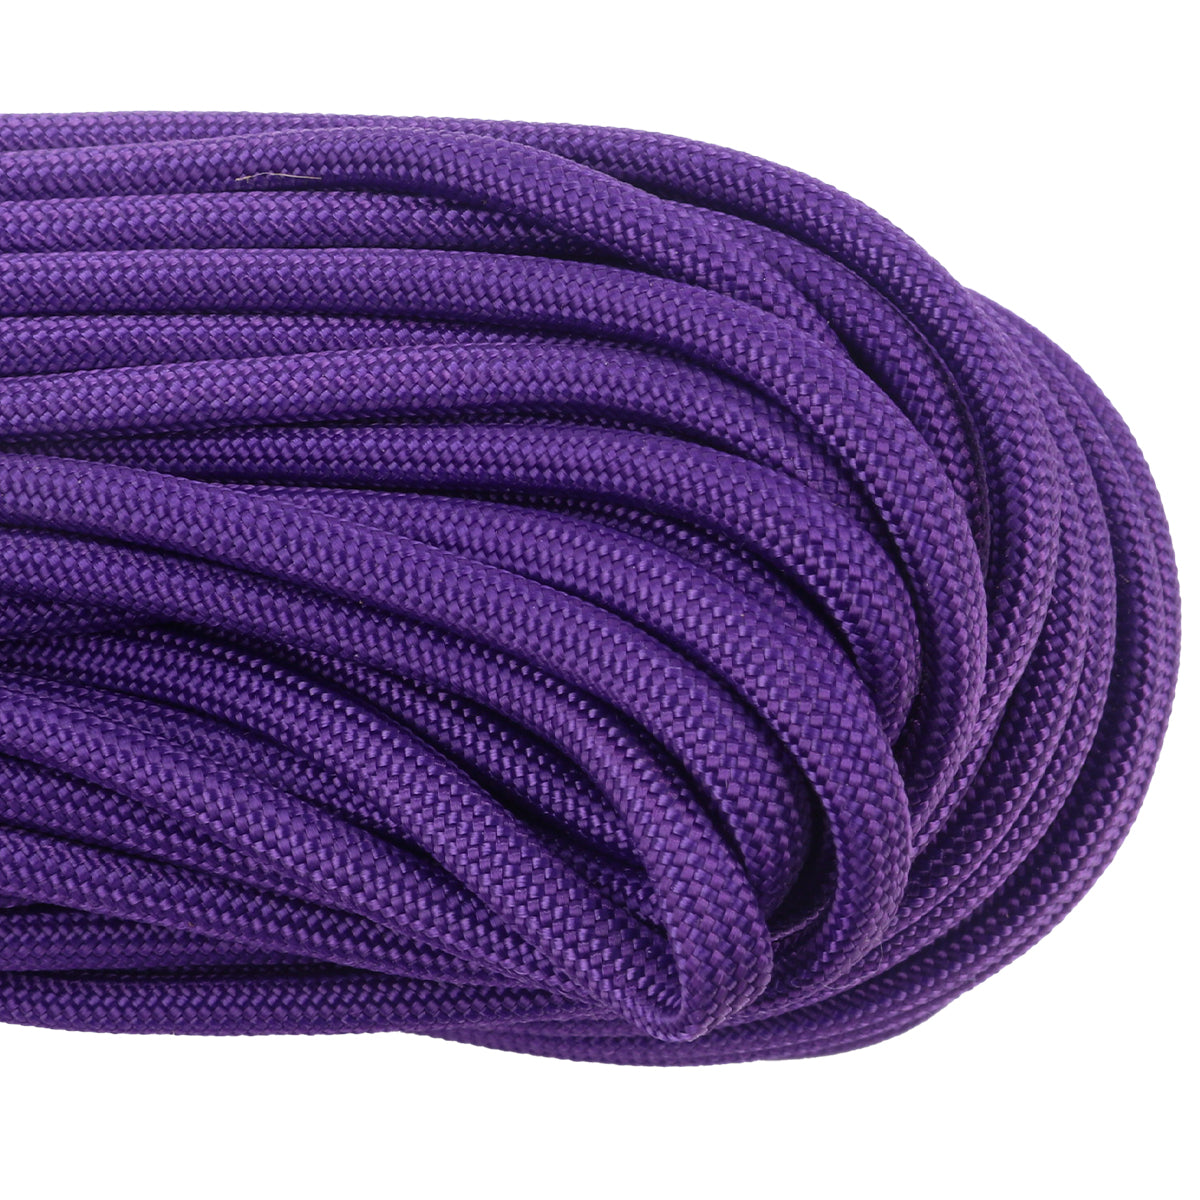 95 Cord Purple Type 1 Paracord 100 Feet on Plastic Winder 1/16 Thick Bored  Paracord Brand -  Canada